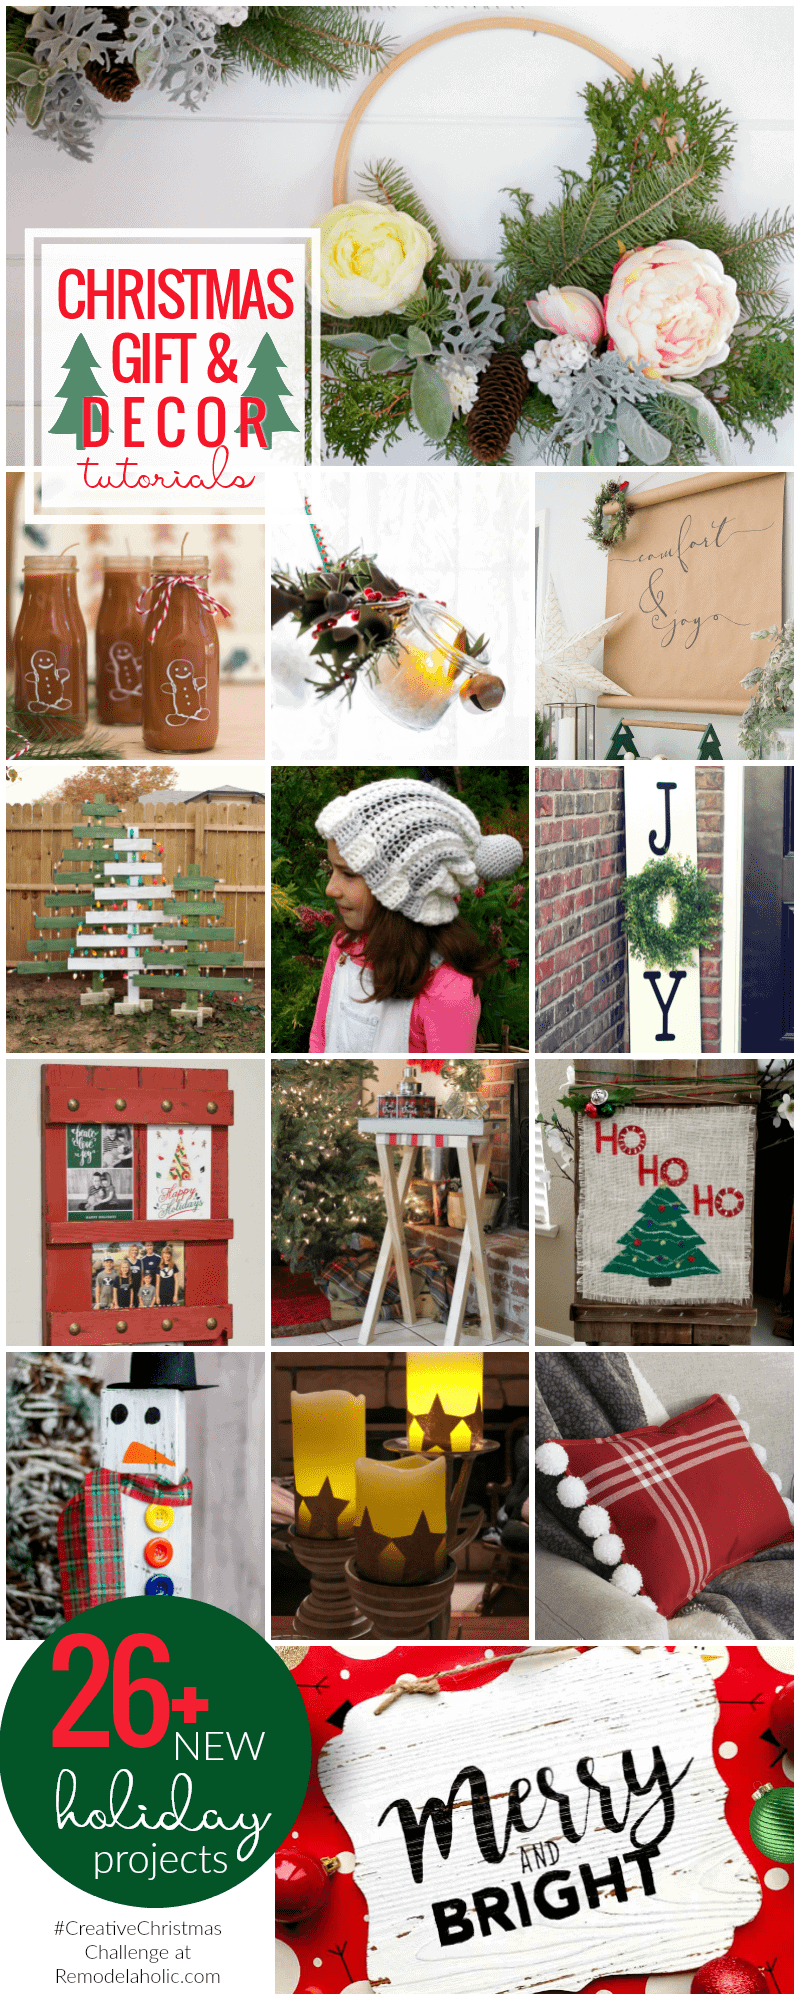 Who's looking for simple Christmas DIY projects? The #CreativeChristmas series on Remodelaholic, where there will be so many project tutorials and ideas, plus the week-long link party for any and all Christmas projects has begun!